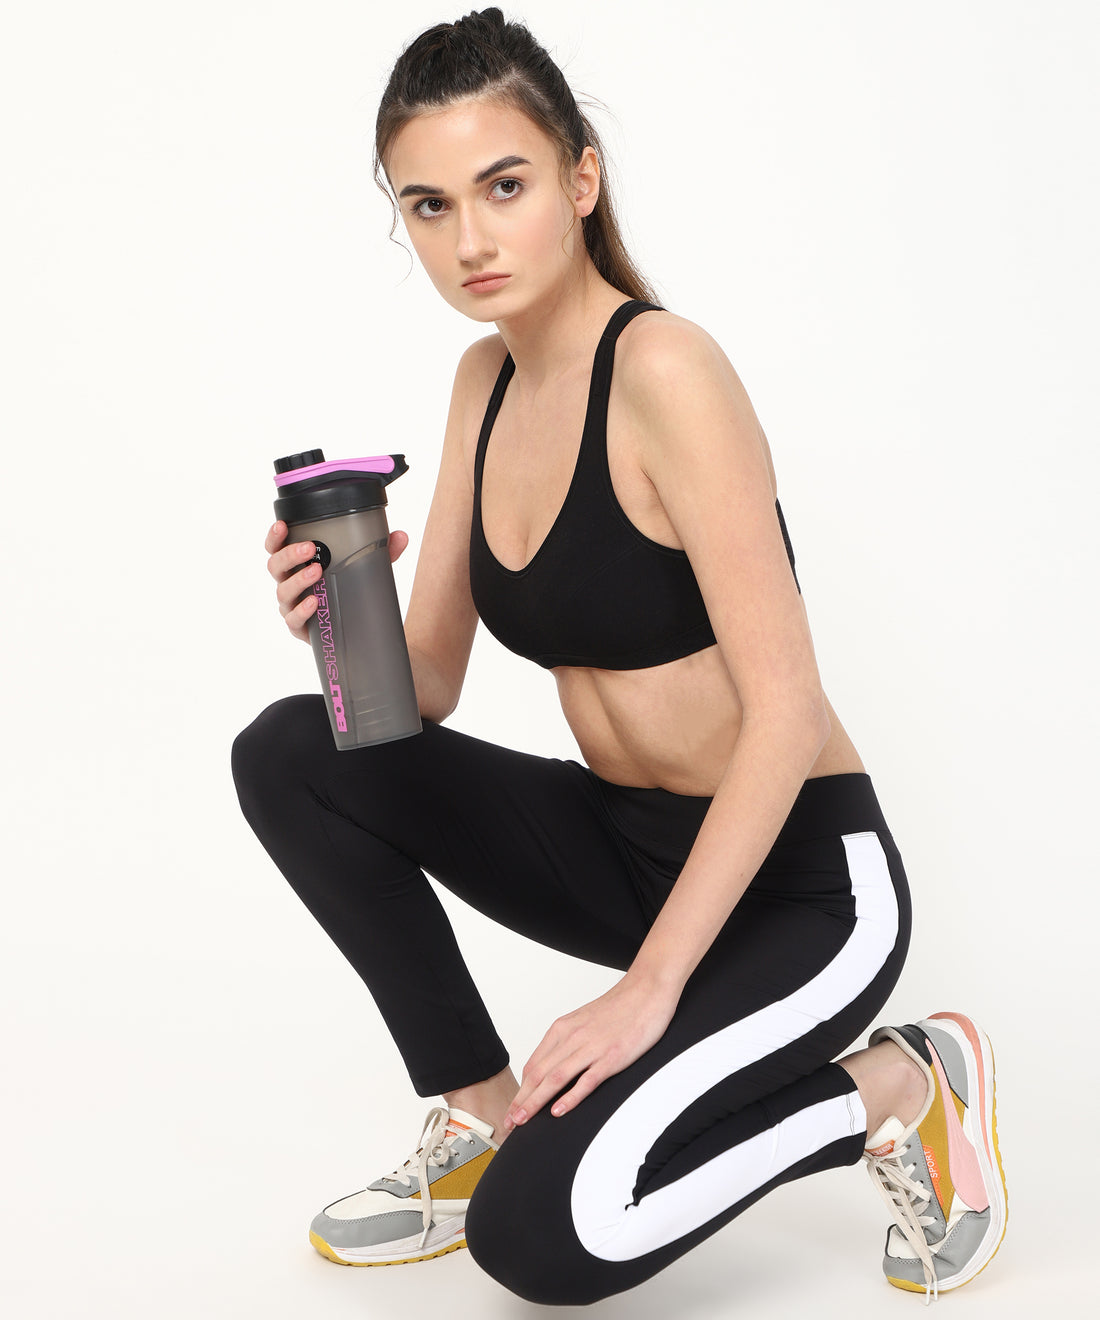 Power Up Your Workout with These Must-Have Women's Active Wear Picks